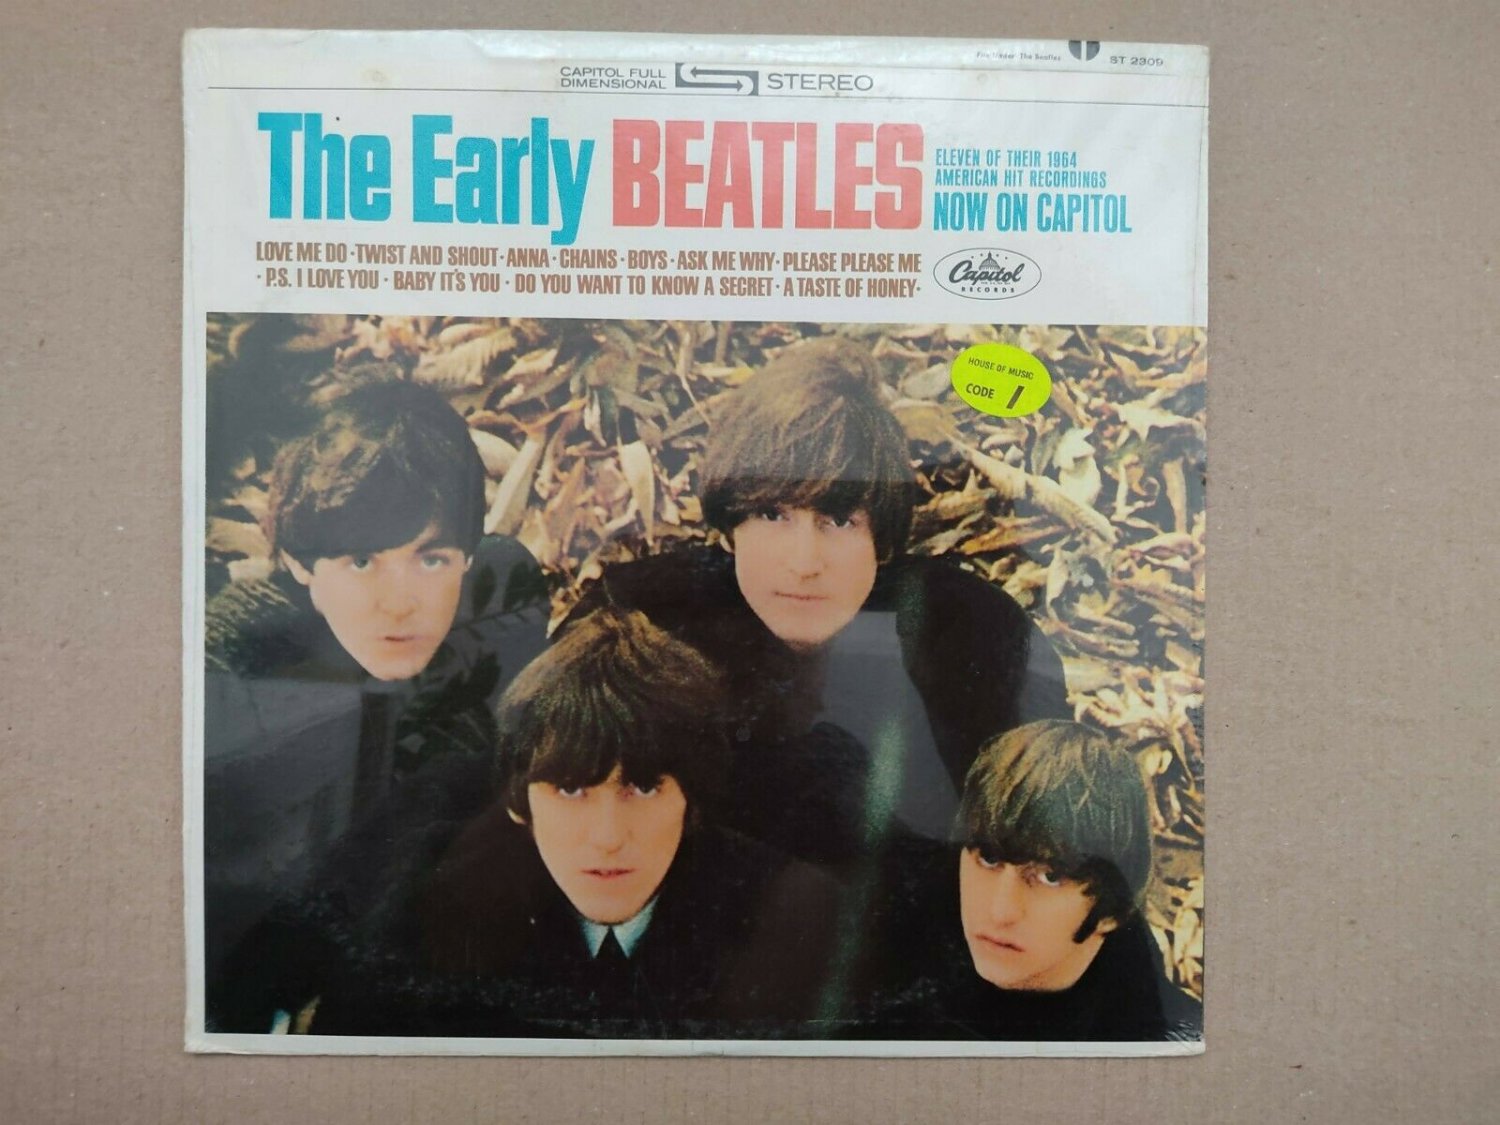 SEALED, The Beatles â��â�� The Early Beatles ST 2309, sticker, RIAA #12, 1973